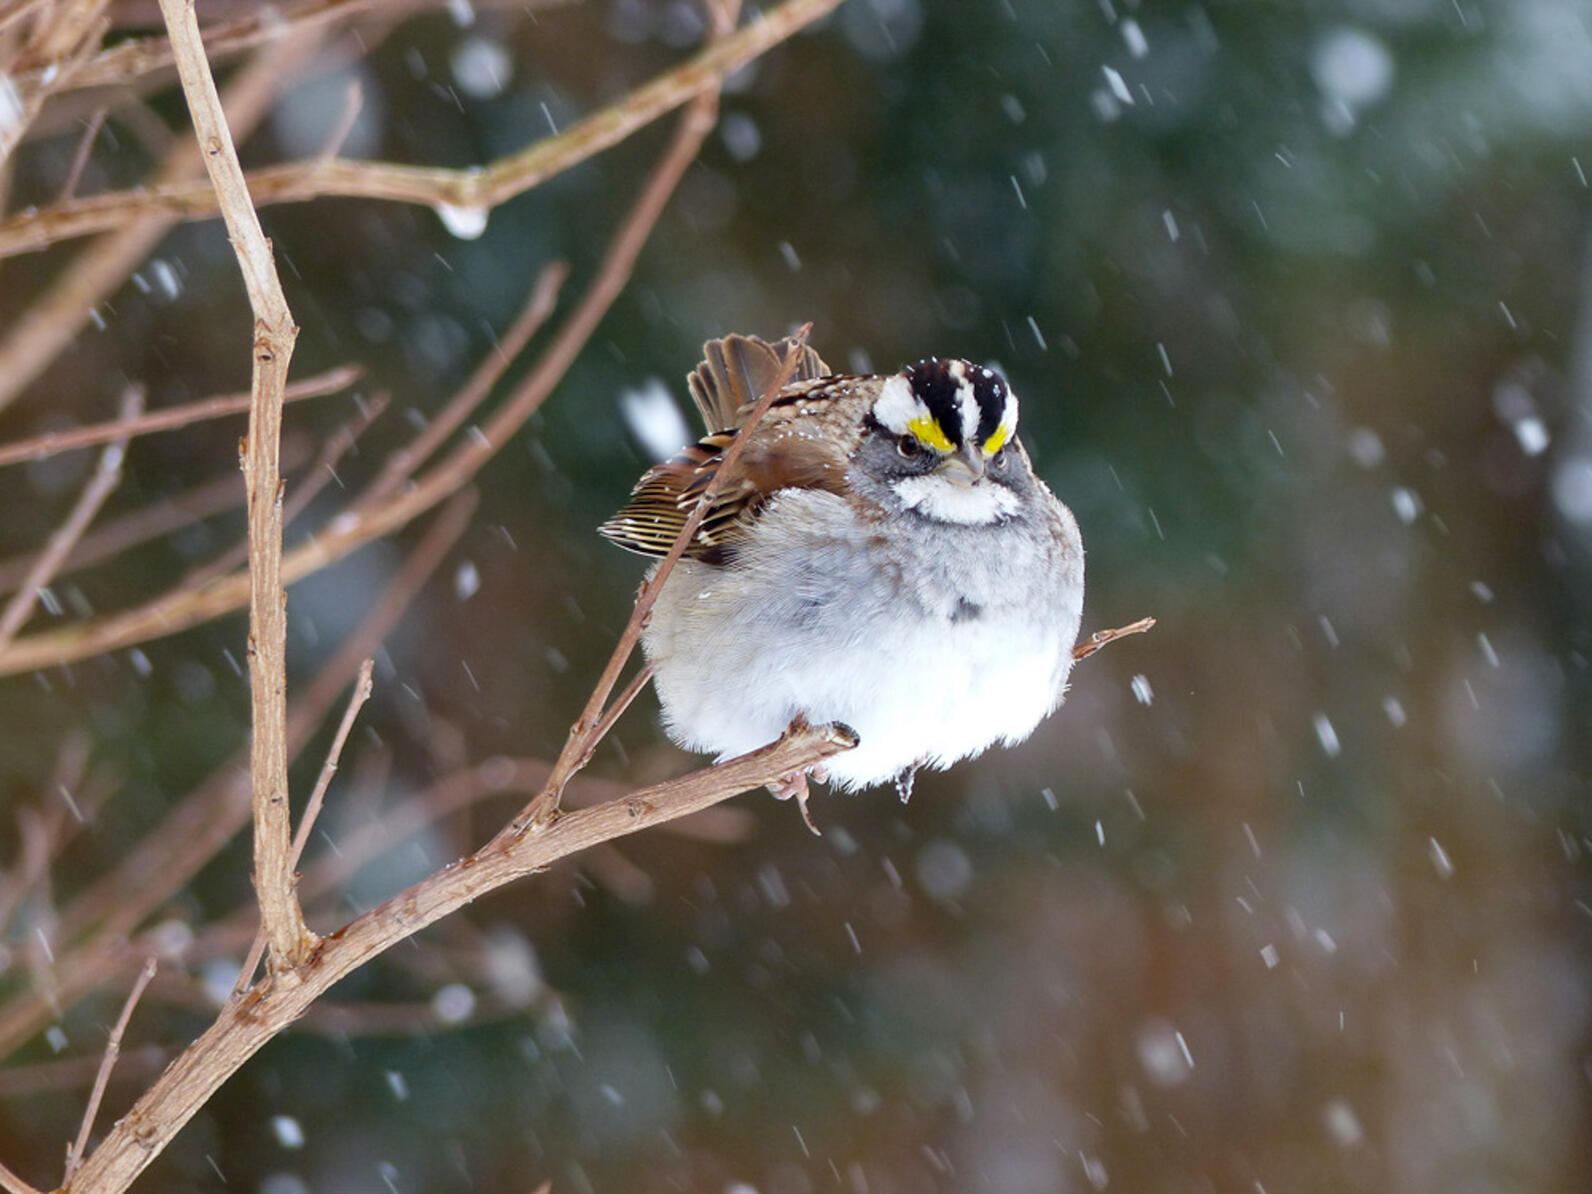 White-throated Sparrow on a branch amidst snow falling.